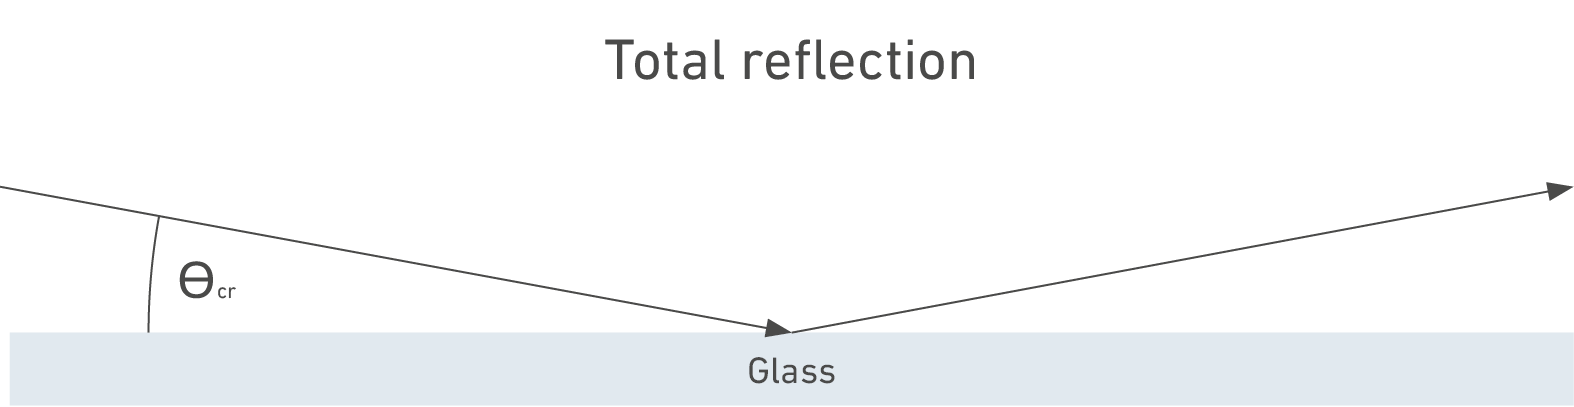 Graphic total reflection